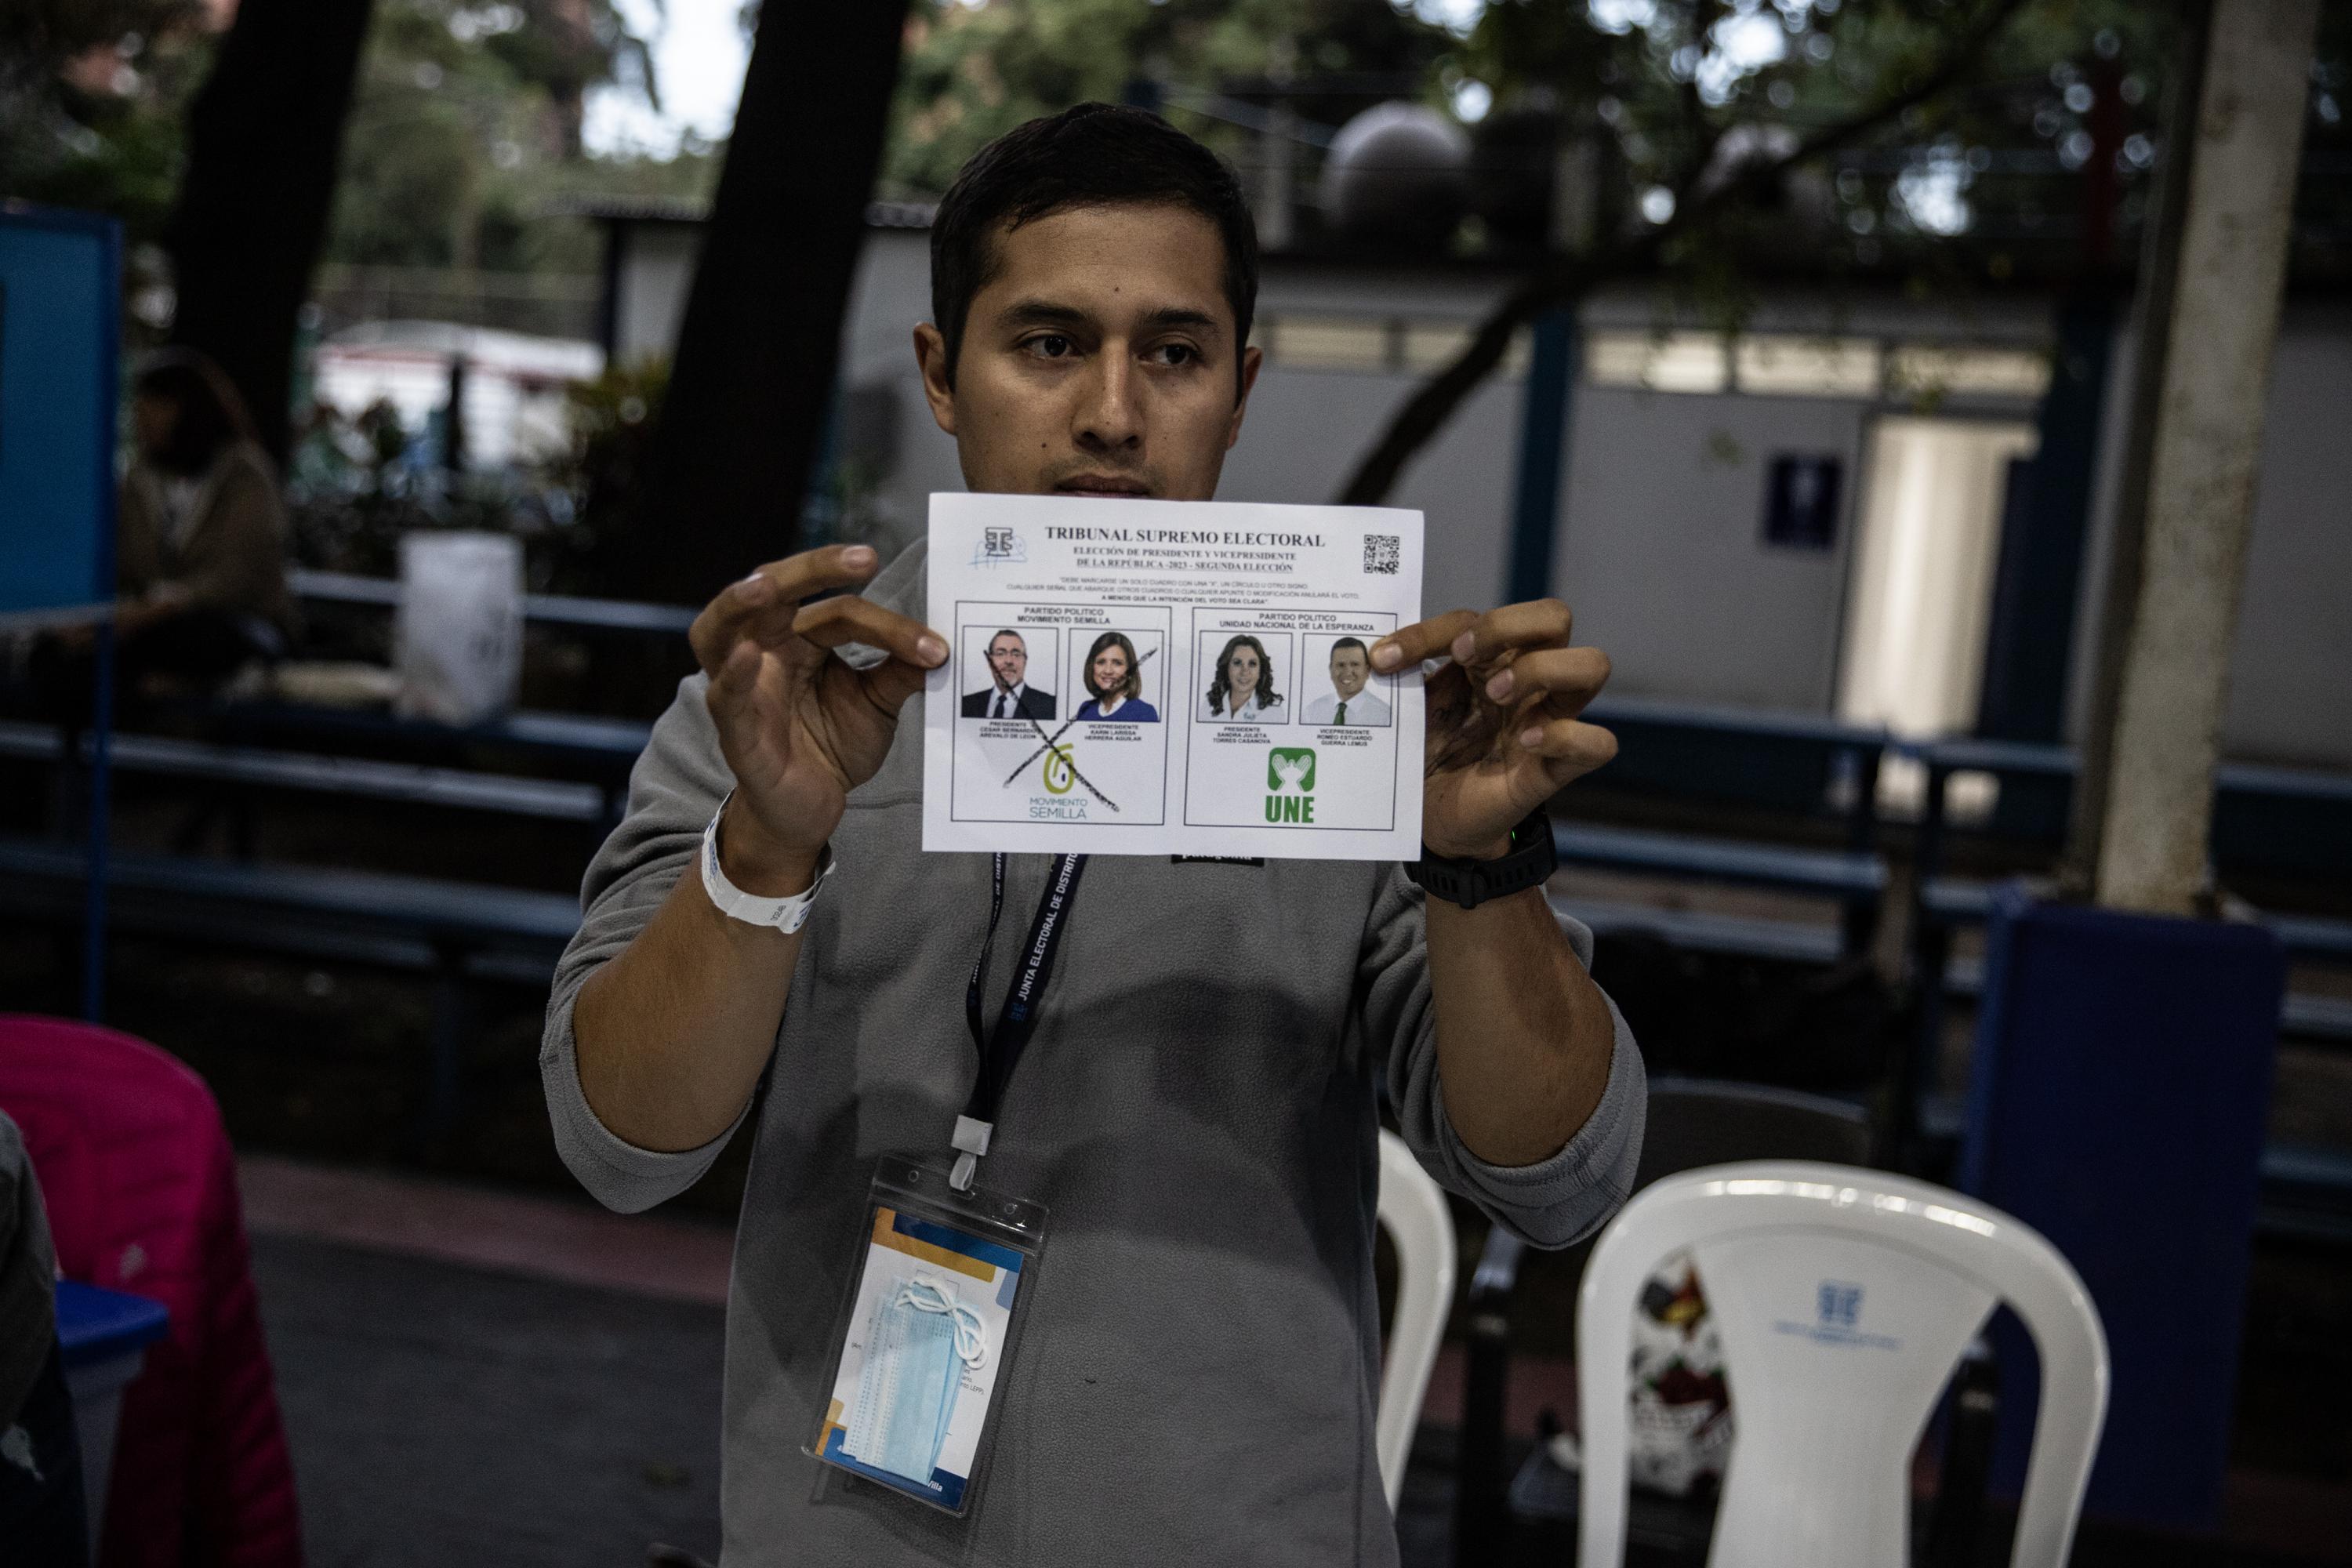 At table 1094 in the Club Los Arcos polling center in the upscale Zone 14 of Guatemala City, Semilla doubled the amount of votes cast in favor of the UNE. Photo Carlos Barrera